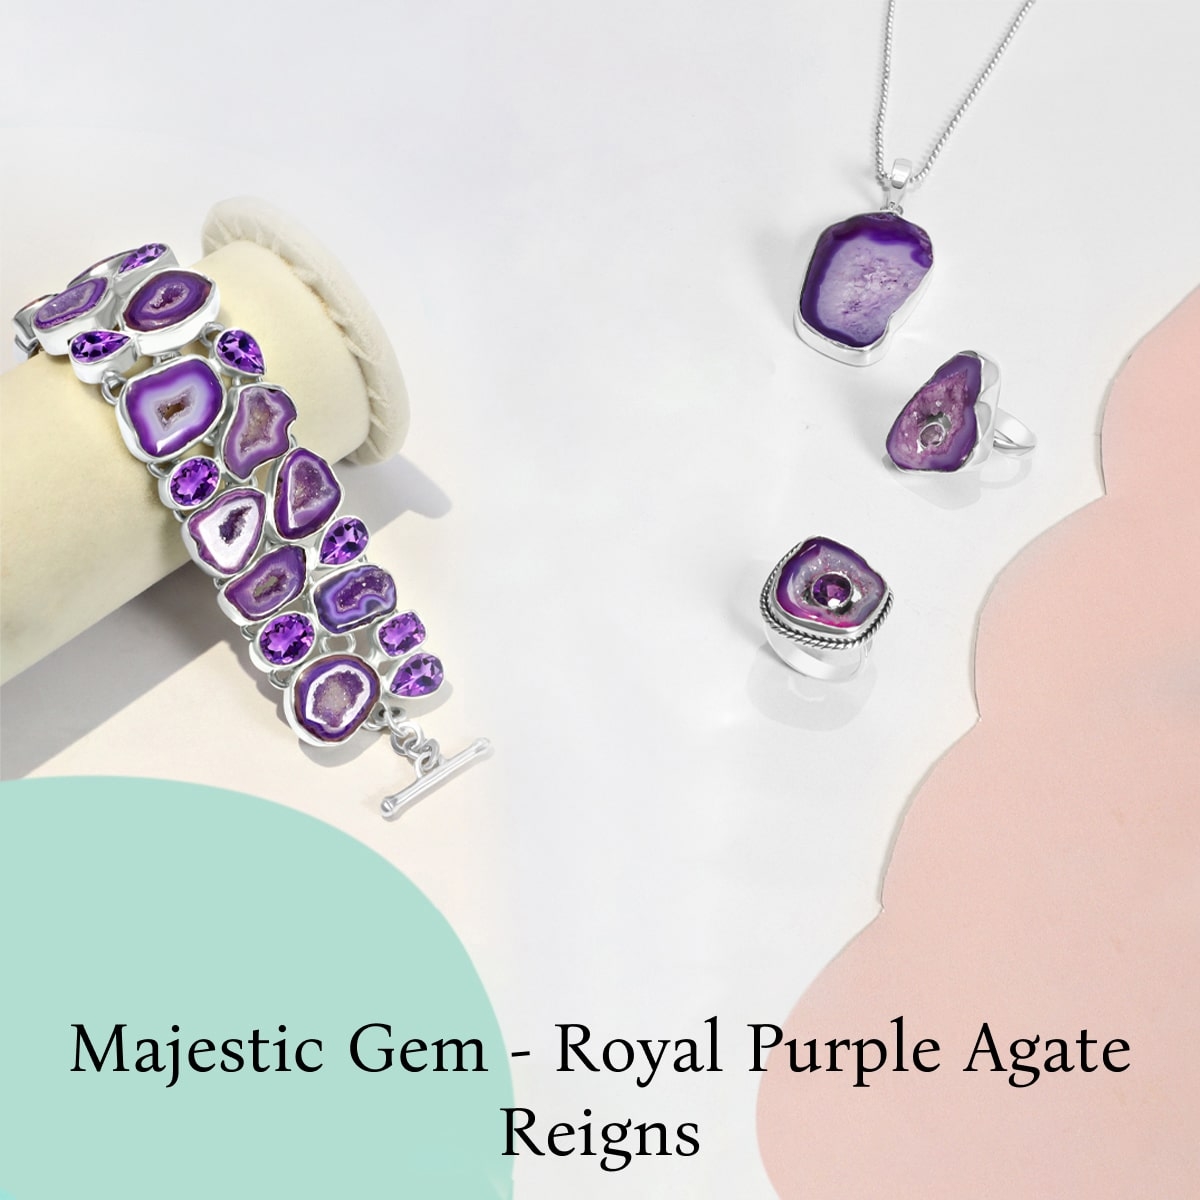 Royal Purple Agate: How This Gem Rules with Majestic Charm